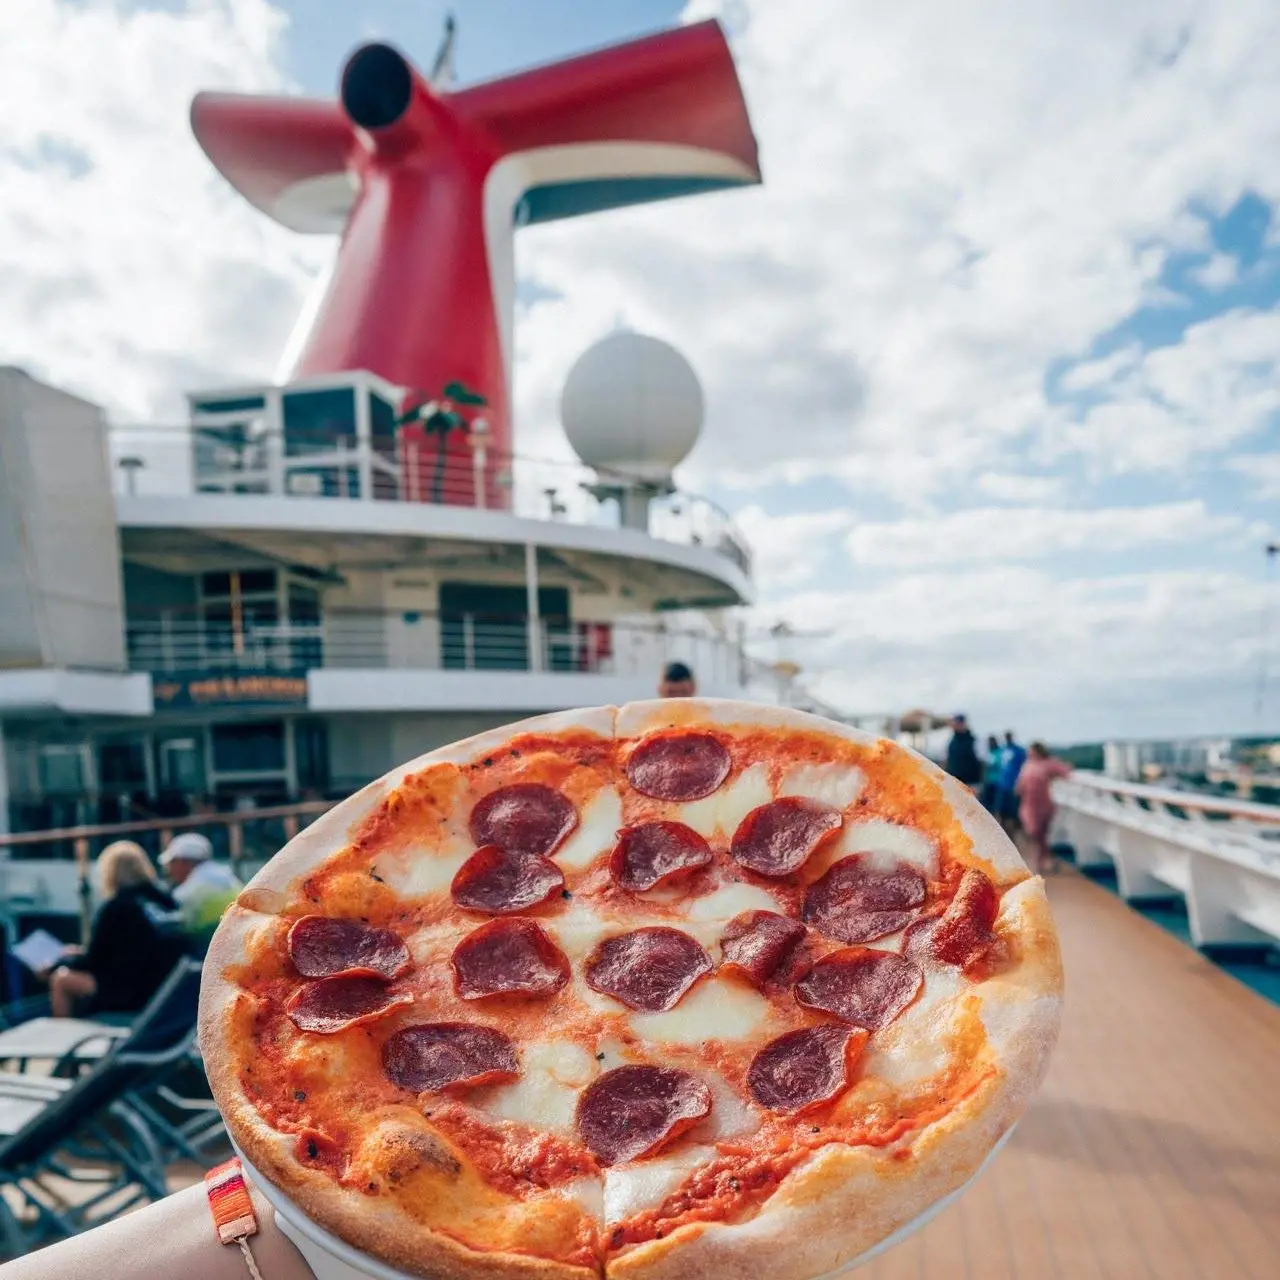 The Cruise Line has posted a Pizza photo on the occasion of National Pizza Day